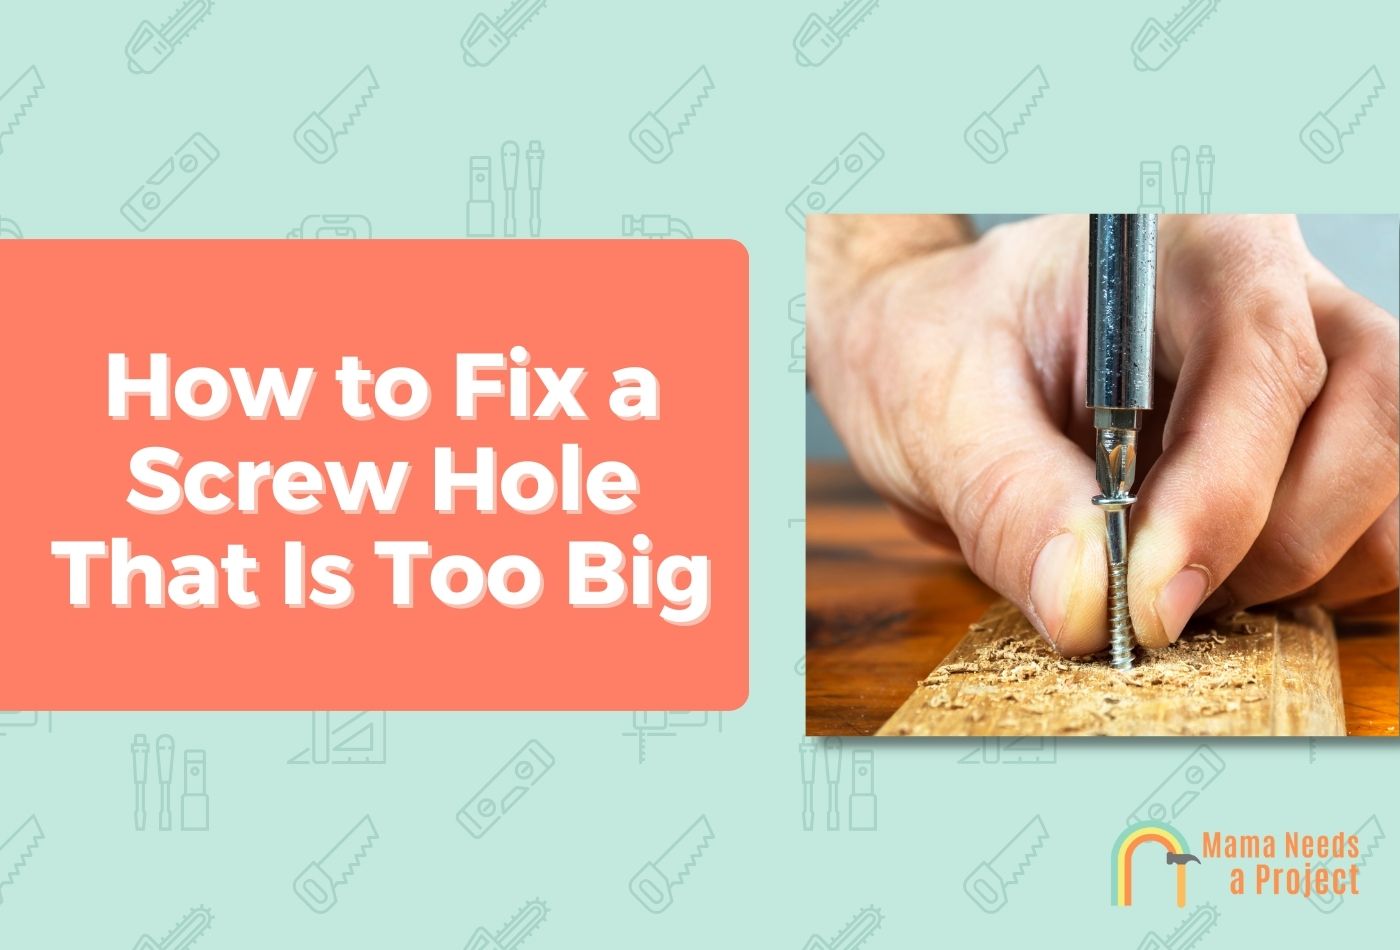 How to Fix a Screw Hole That Is Too Big